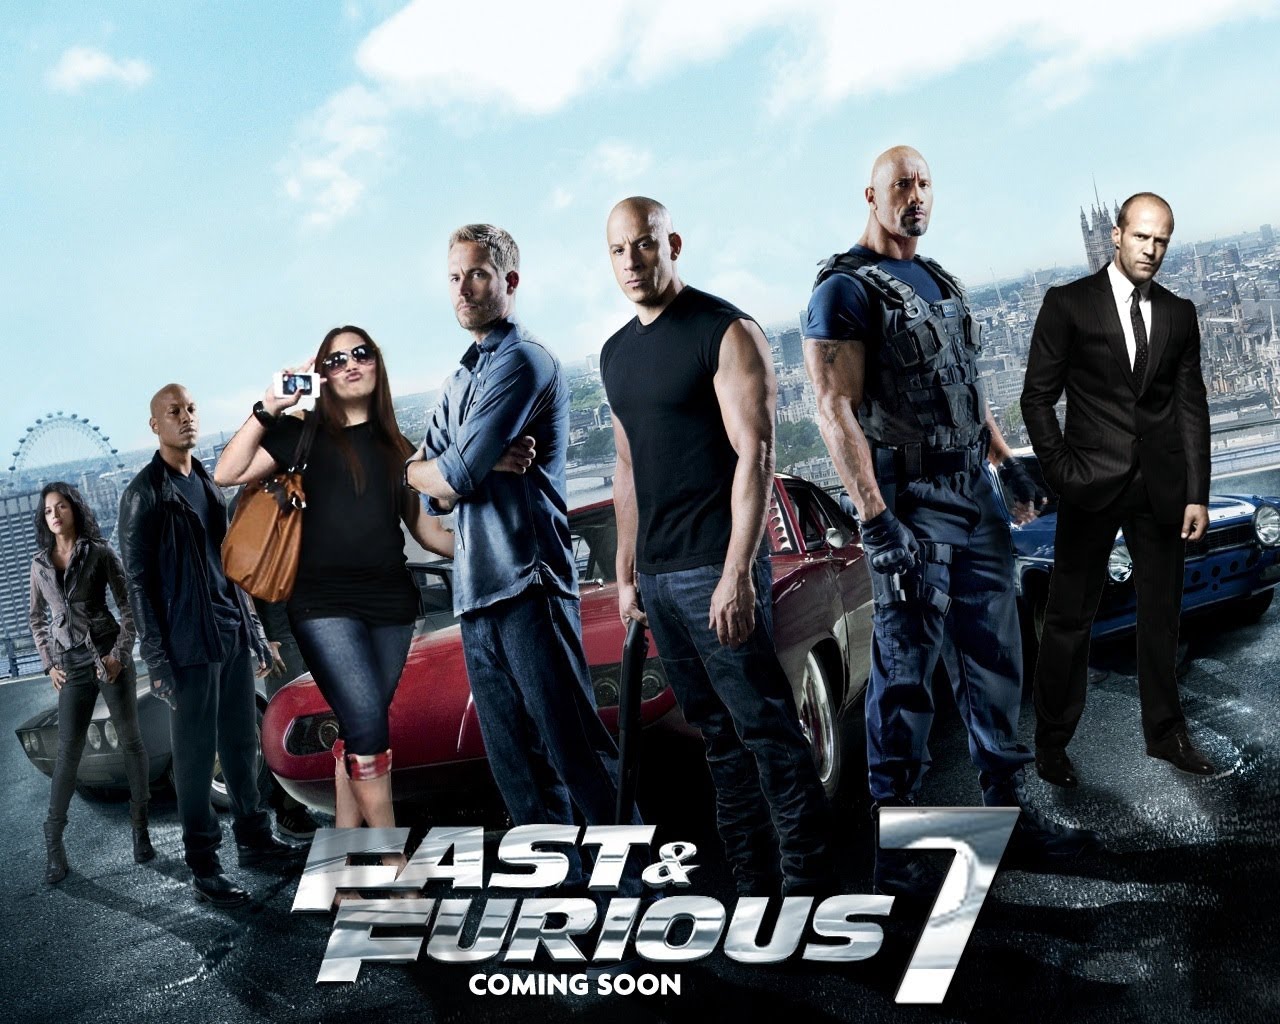 Fast and Furious 7 (2015) Tamil Dubbed Movie Watch Online